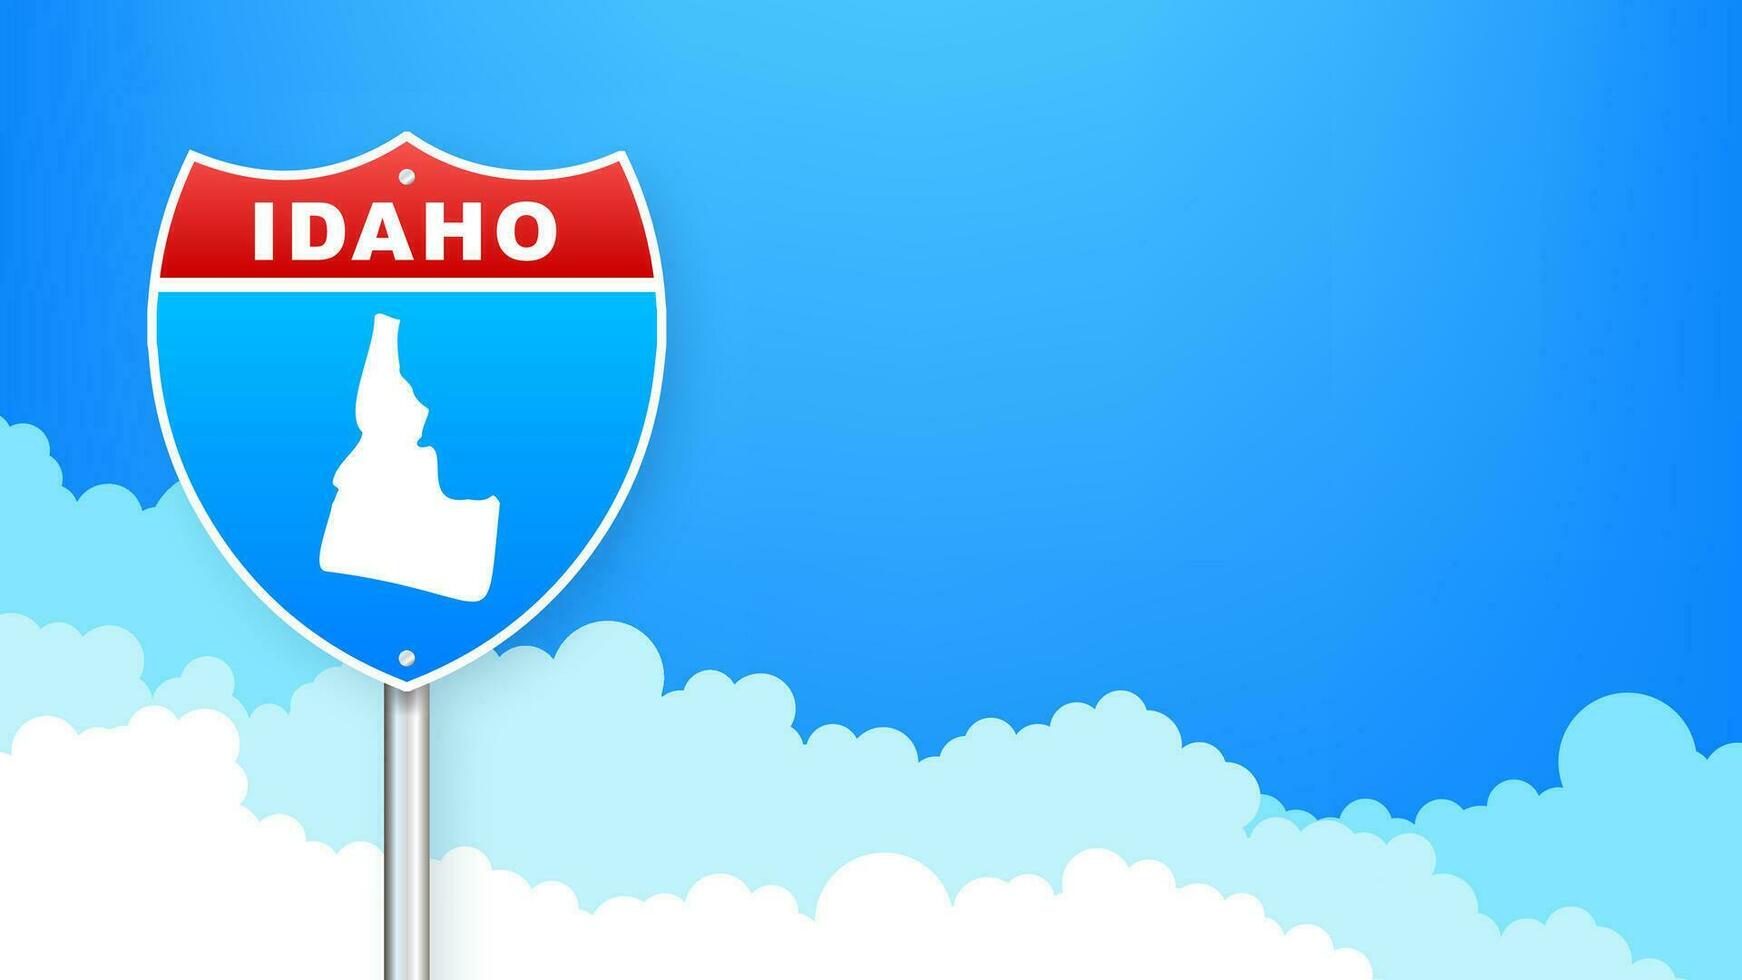 Idaho map on road sign. Welcome to State of Idaho. Vector illustration